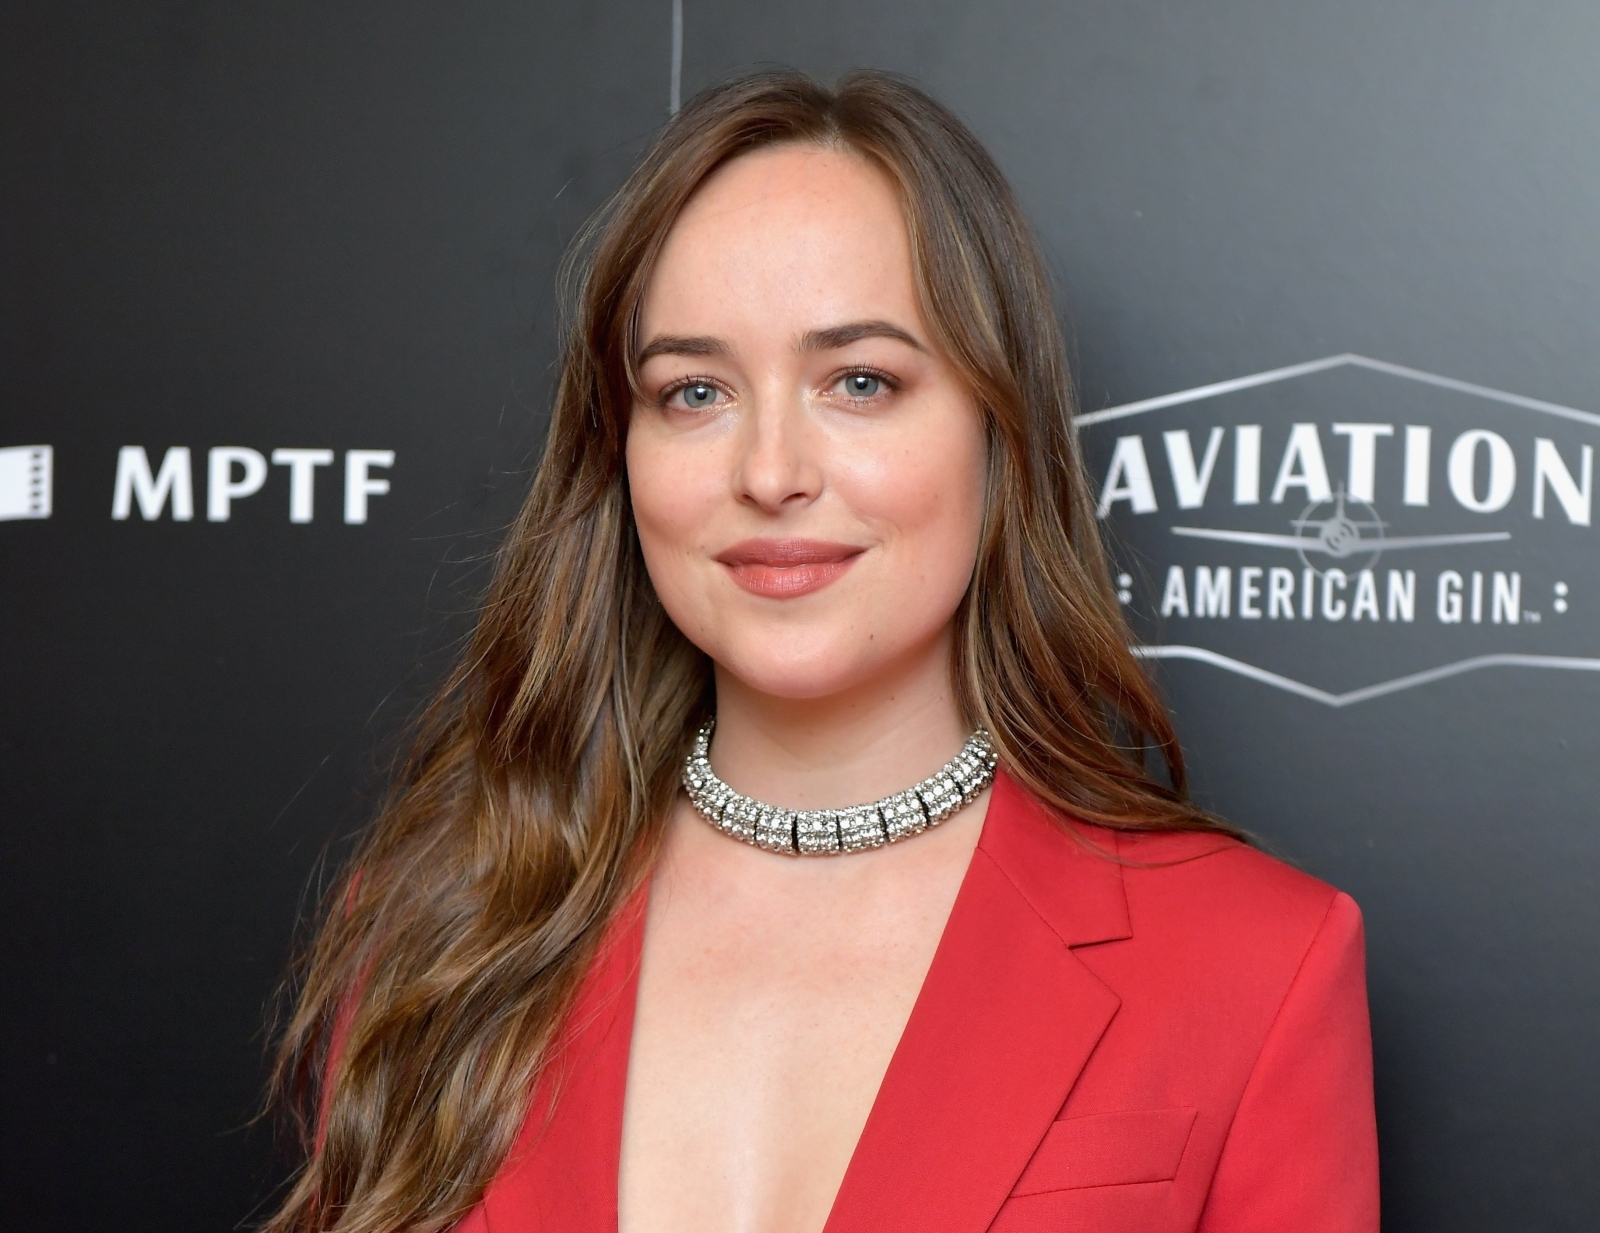 Fifty Shades Star Dakota Johnson Poses In Lingerie For Risqué Allure Shot Classy And Perfect